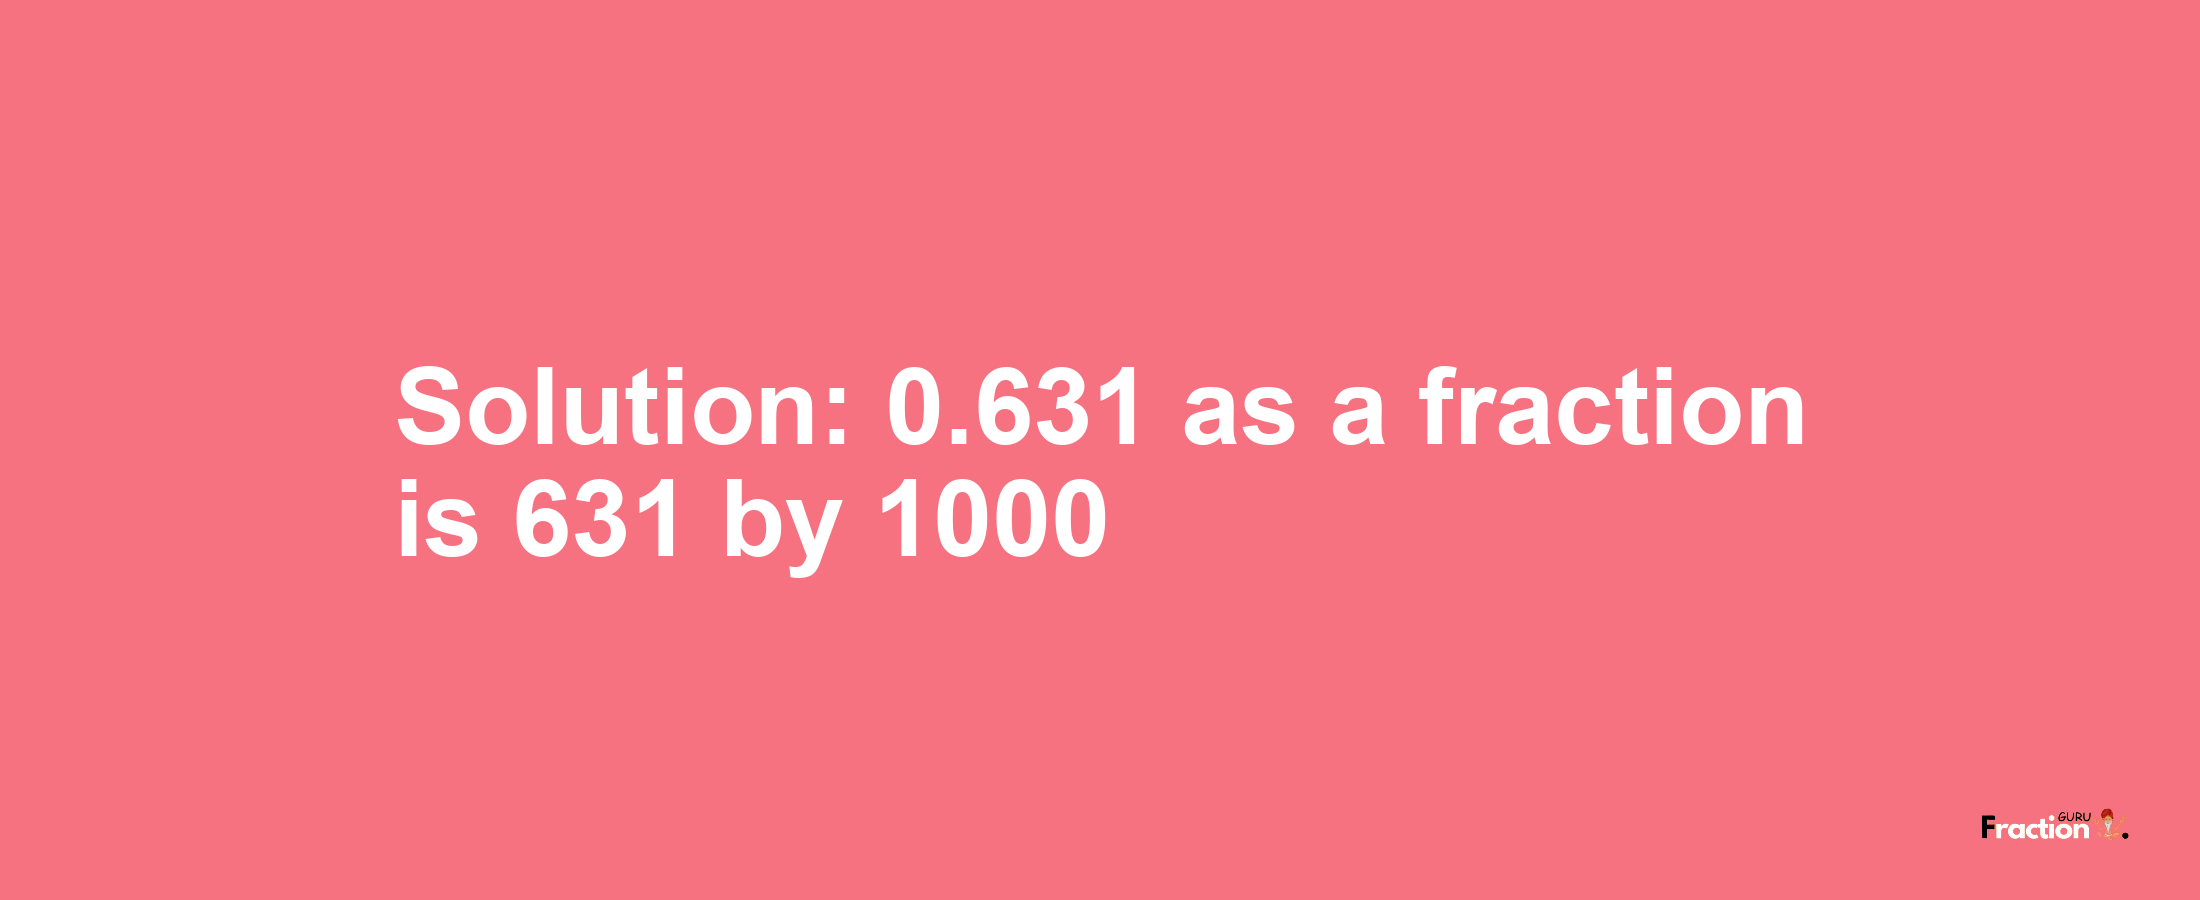 Solution:0.631 as a fraction is 631/1000